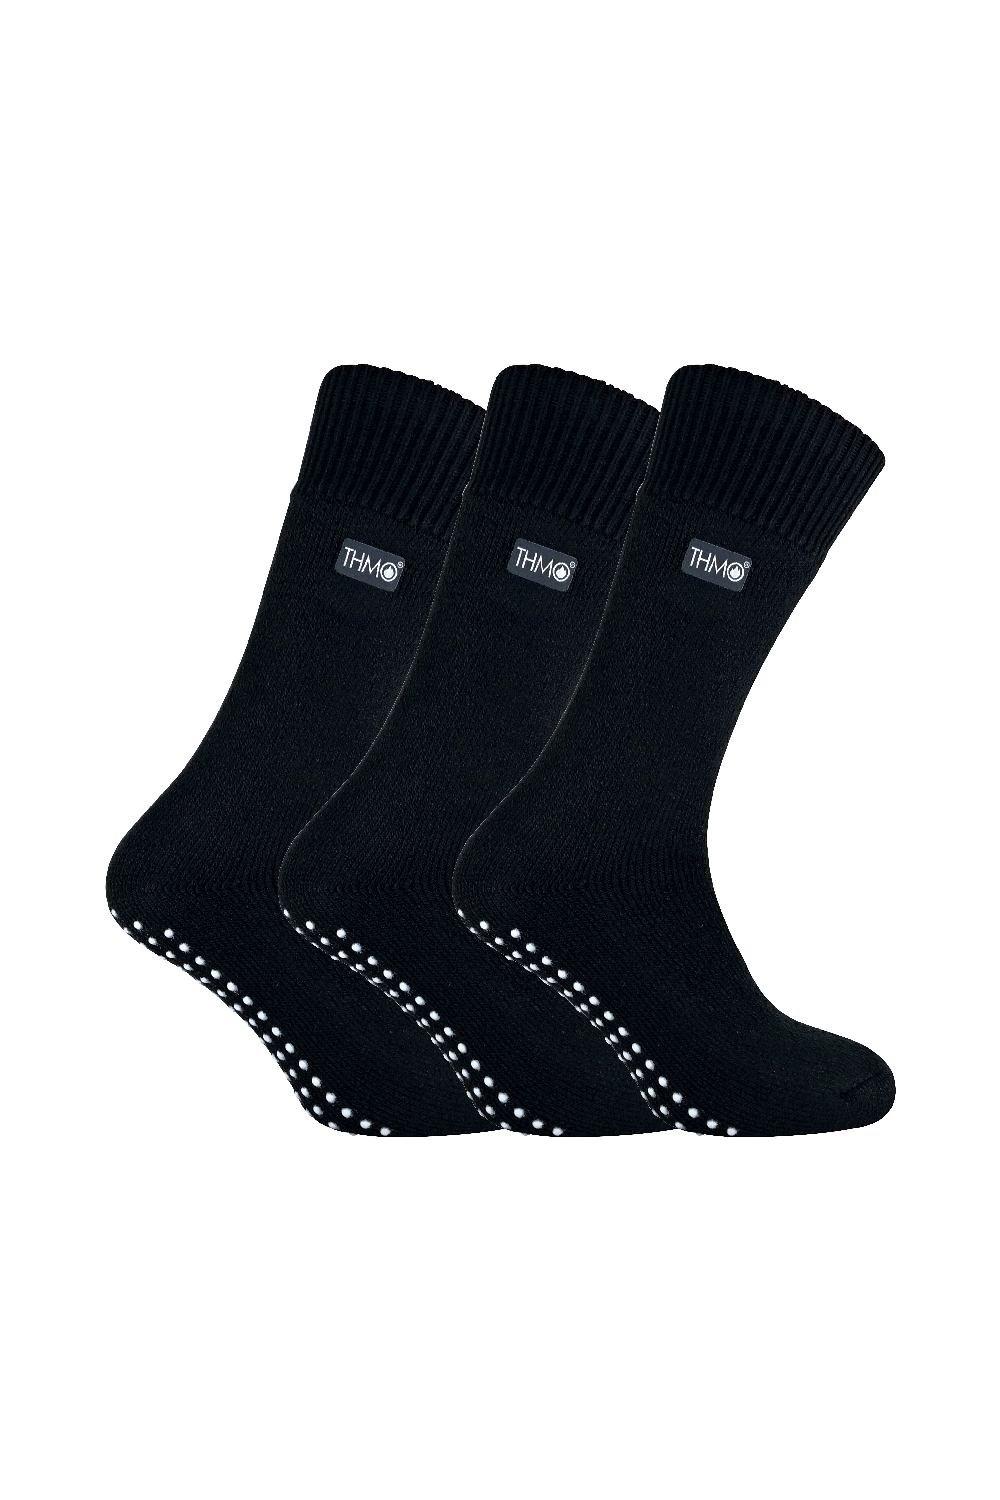 3 Pairs Fleece Lined Slipper Socks - Crew Socks with Grippers